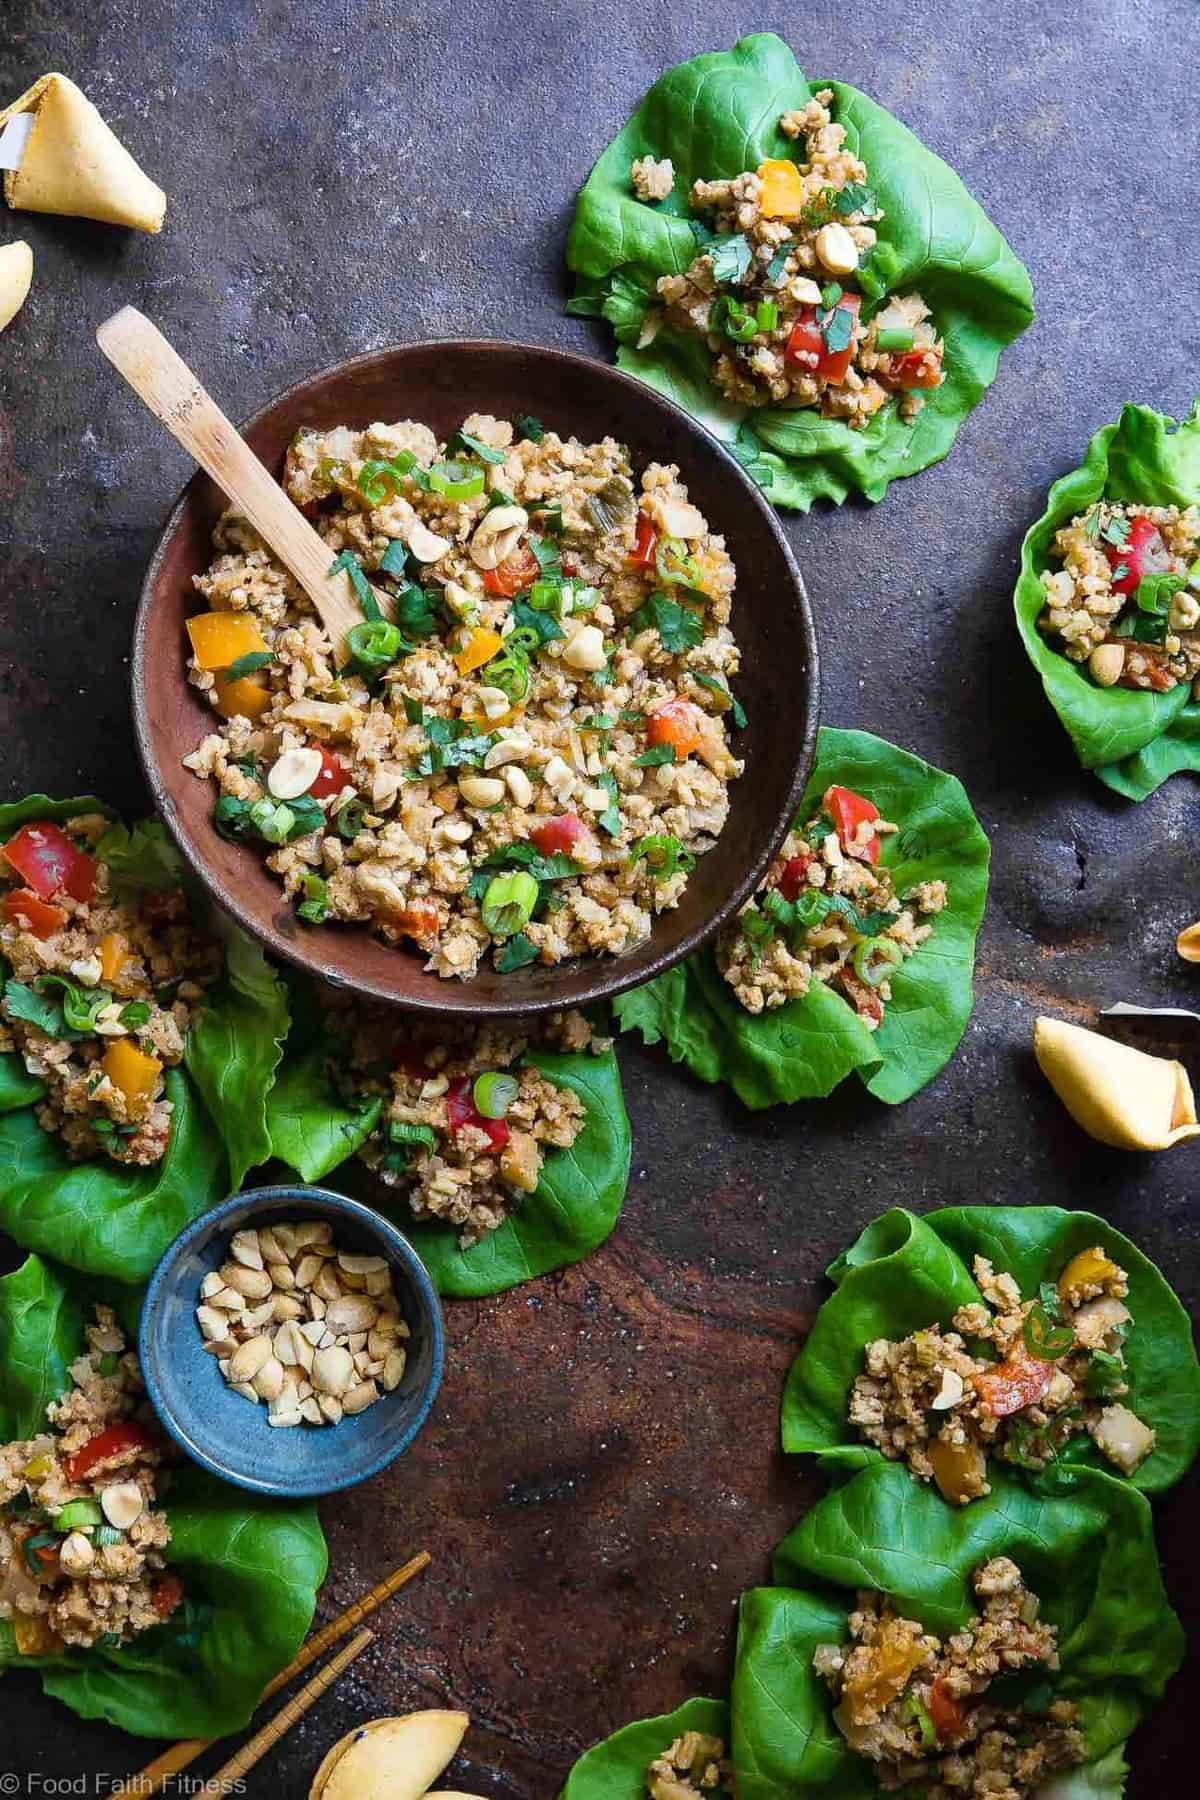 Asian Crockpot Lettuce Wraps - These healthy Lettuce Wraps couldn't be easier! The slow cooker does all the work for you and they're secretly veggie packed and paleo, gluten free, whole30 and under 350 calories! | #Foodfaithfitness | #Glutenfree #Healthy #Paleo #Whole30 #SlowCooker